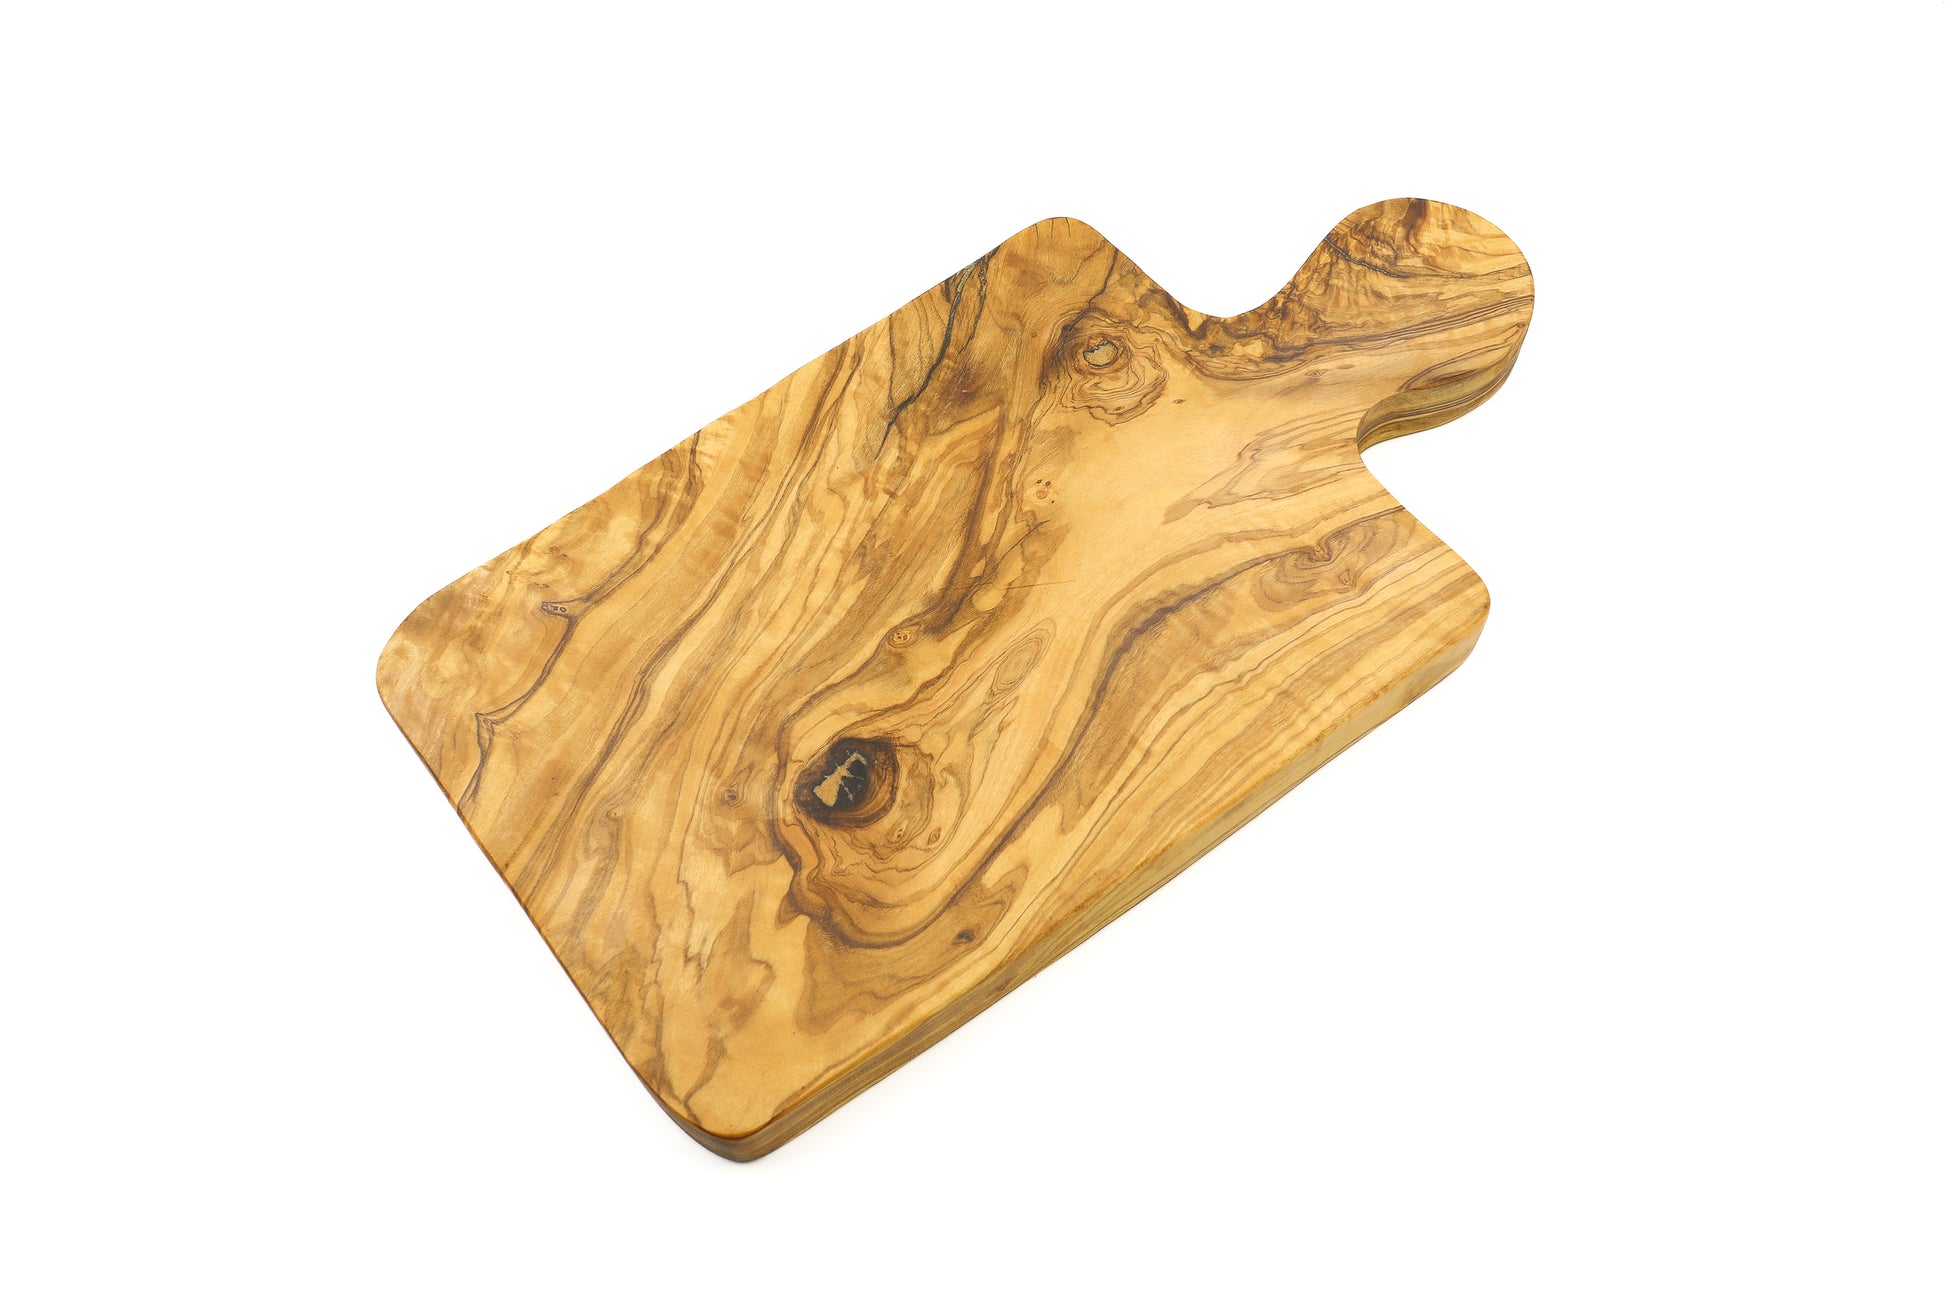 Cheese exhibit tray made from olive wood